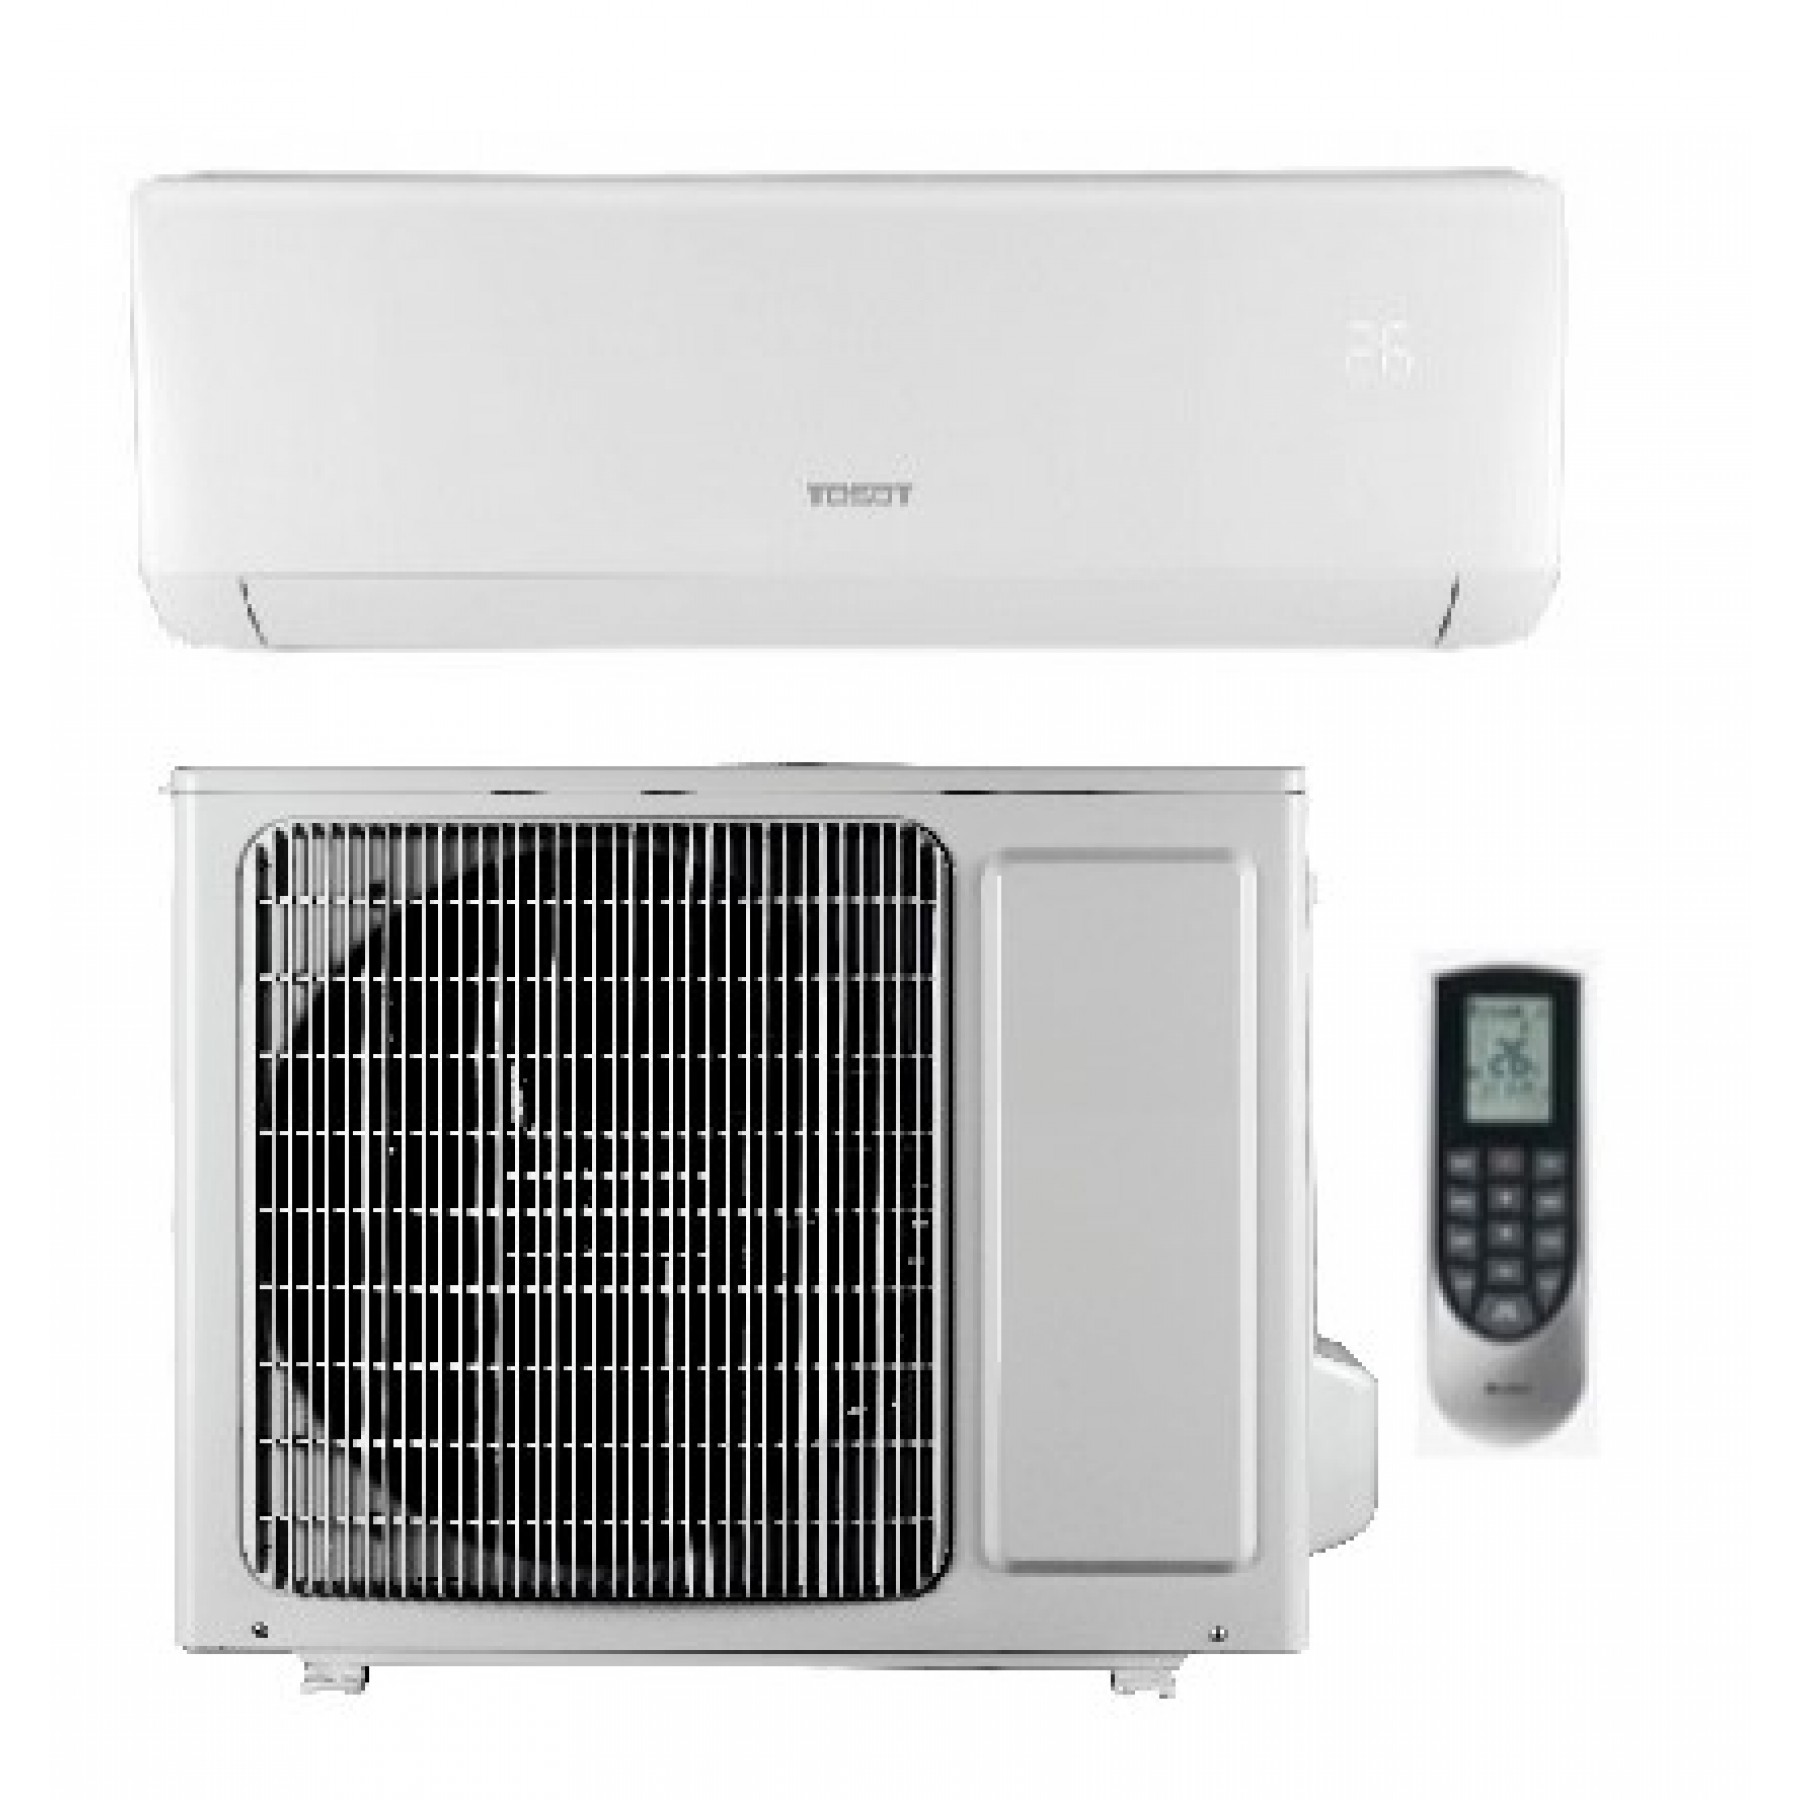 sectie bruiloft kaping Tosot Bora GWH18AAB 4,6kW Inverter R32 - RW-Airconditioning